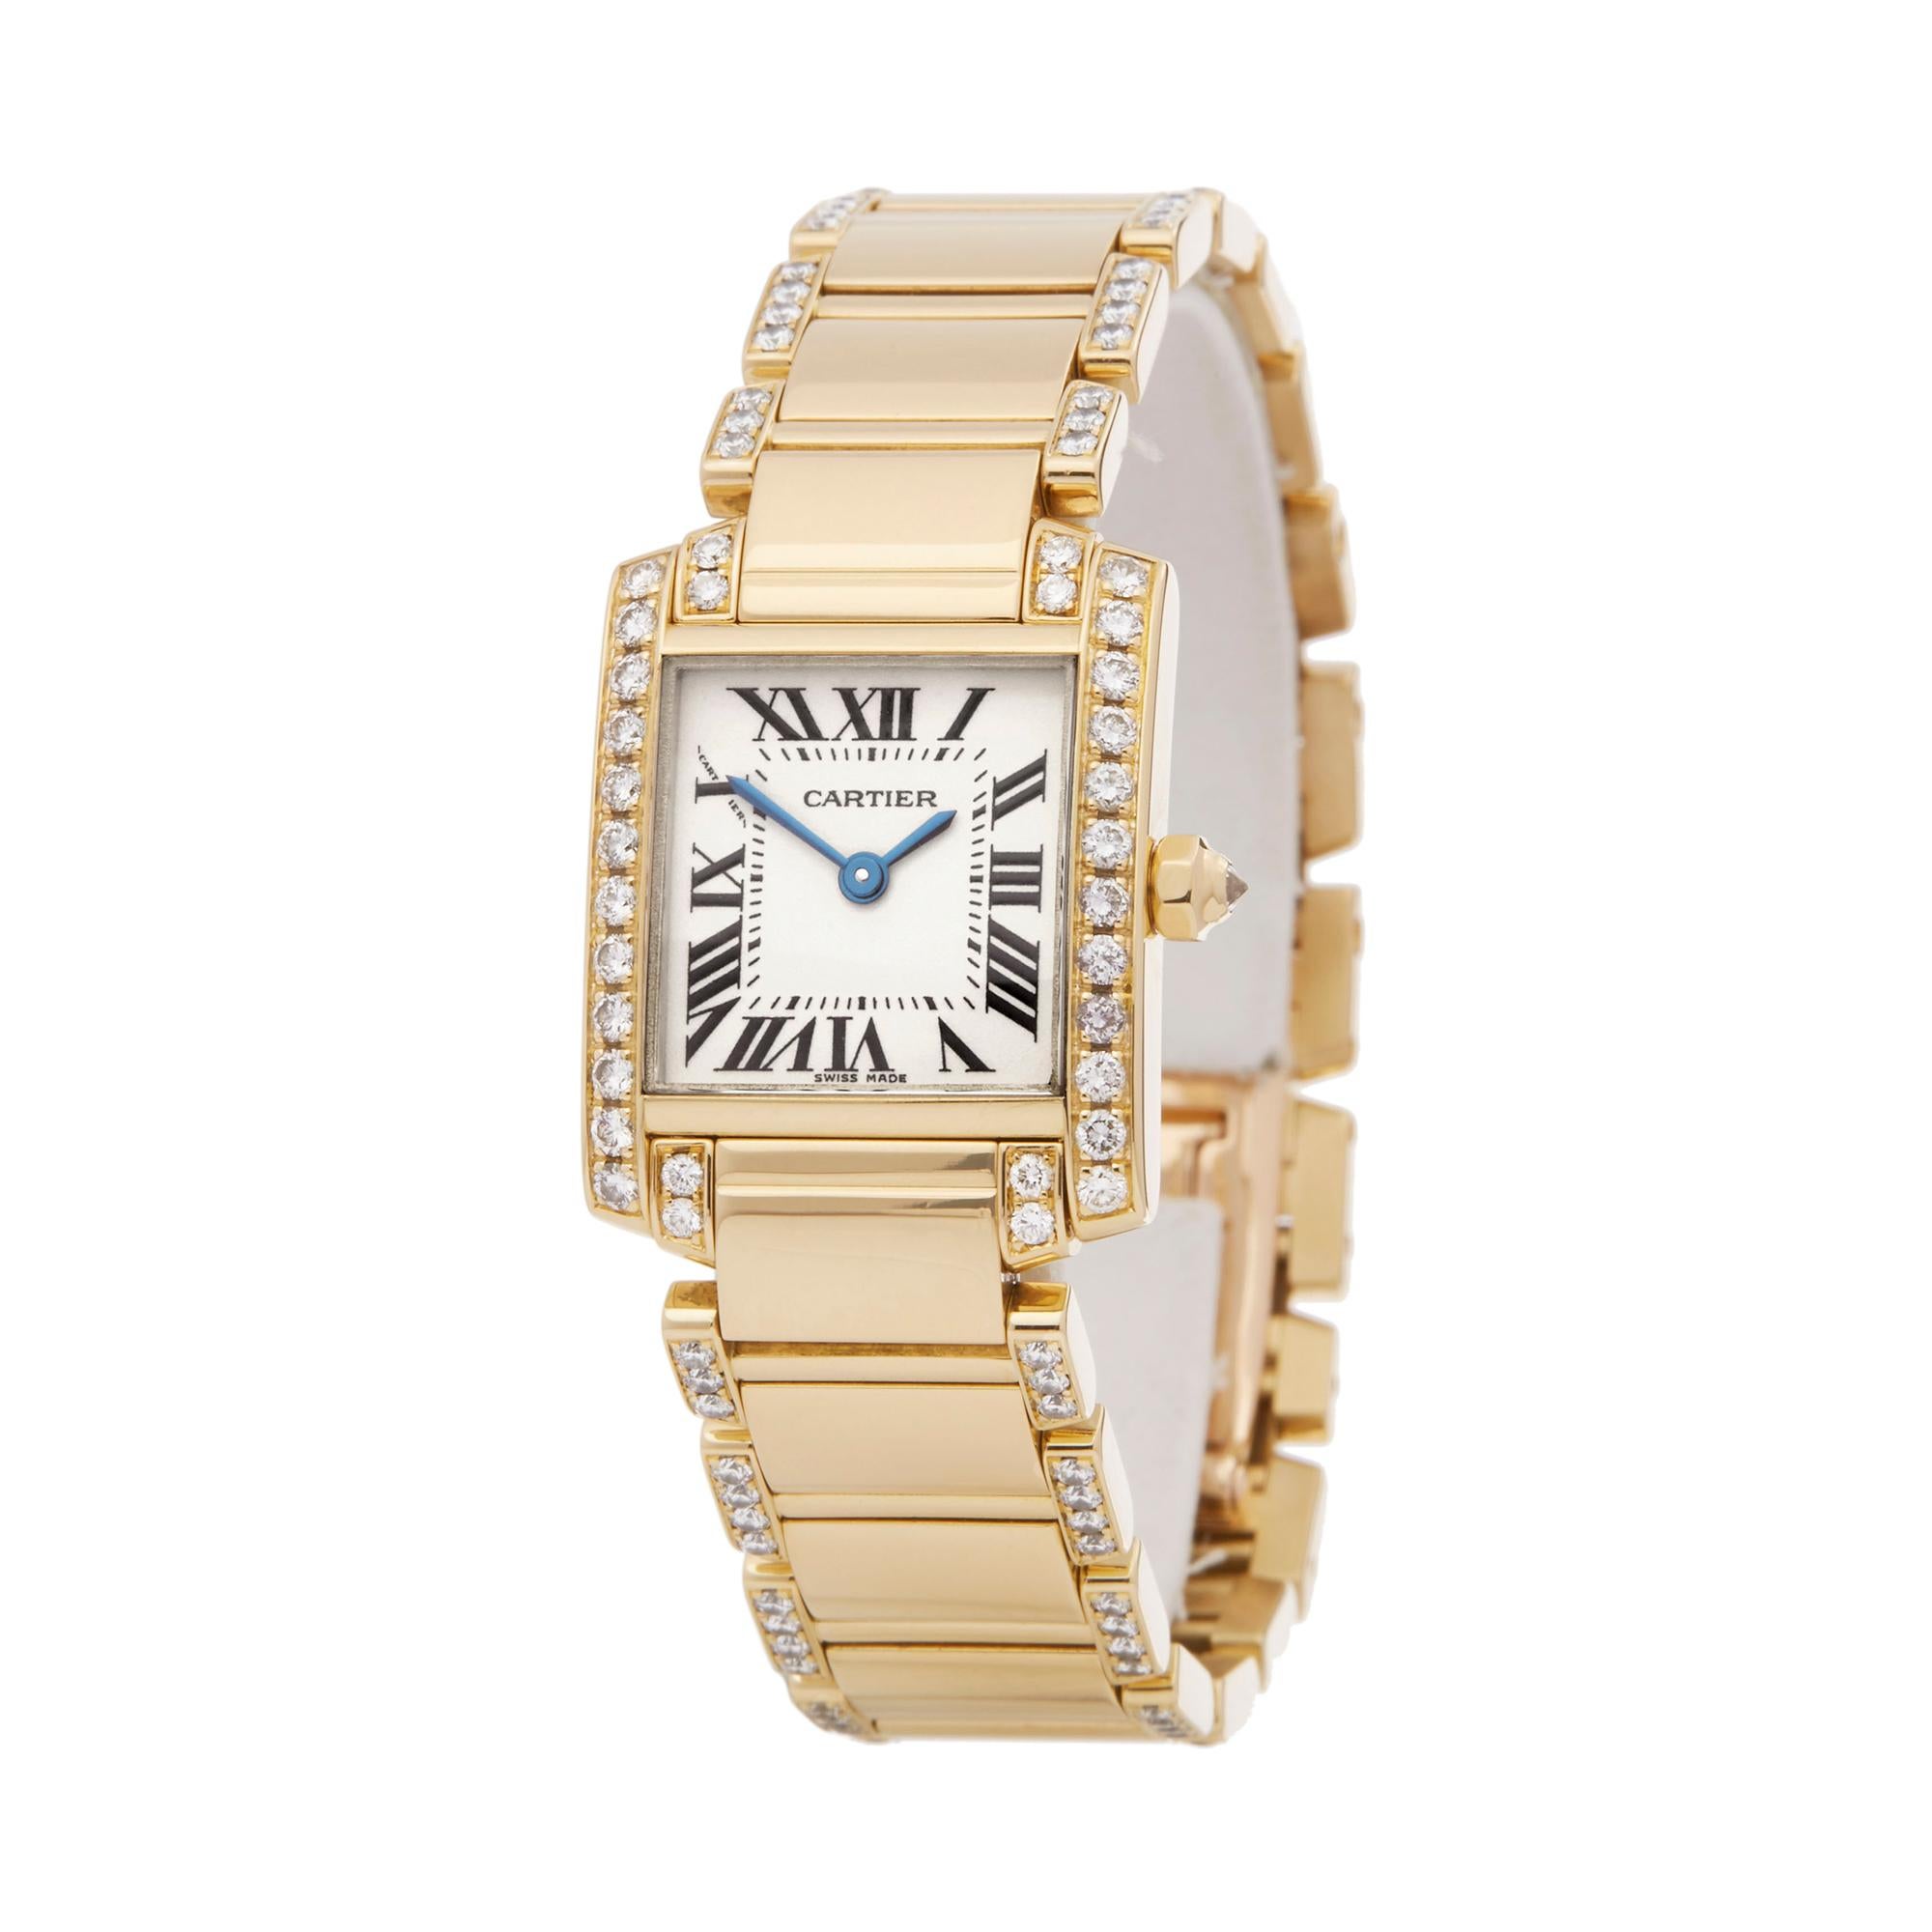 Reference: W6126
Manufacturer: Cartier
Model: Tank Francaise
Model Reference: 2385 or WE1001RG
Age: Circa 2000's
Gender: Women's
Box and Papers: Box, Manuals and Service Papers Dated August 2015
Dial: White Roman
Glass: Sapphire Crystal
Movement: